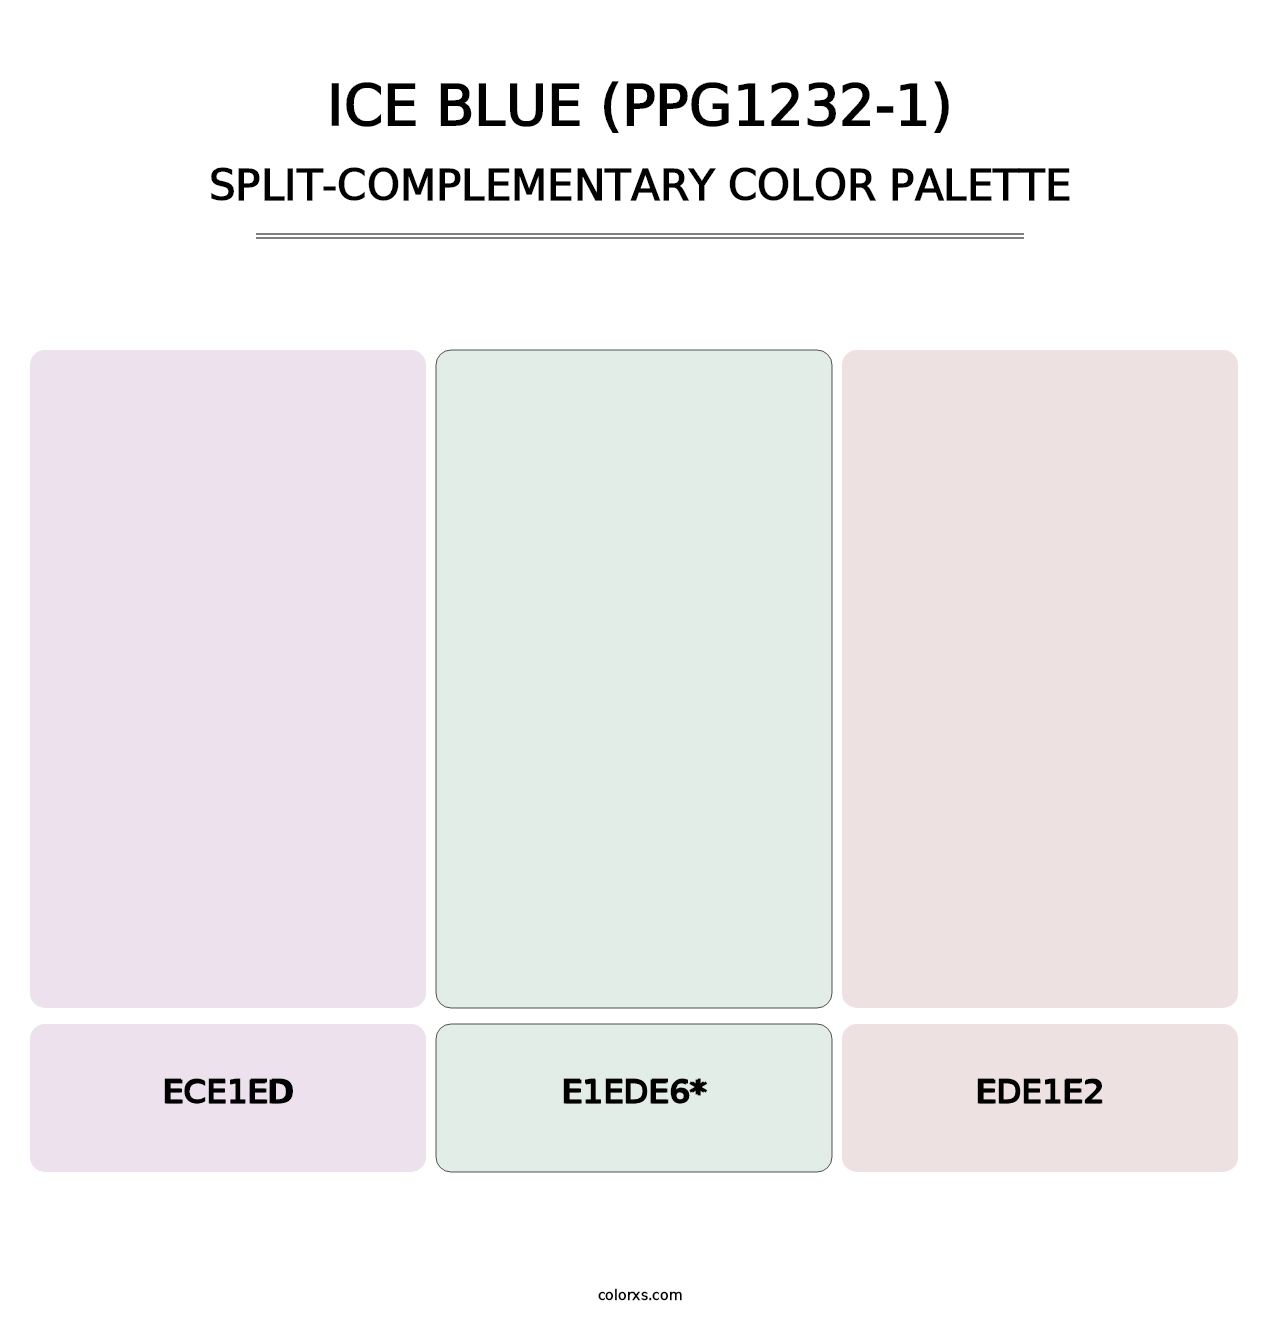 Ice Blue (PPG1232-1) - Split-Complementary Color Palette